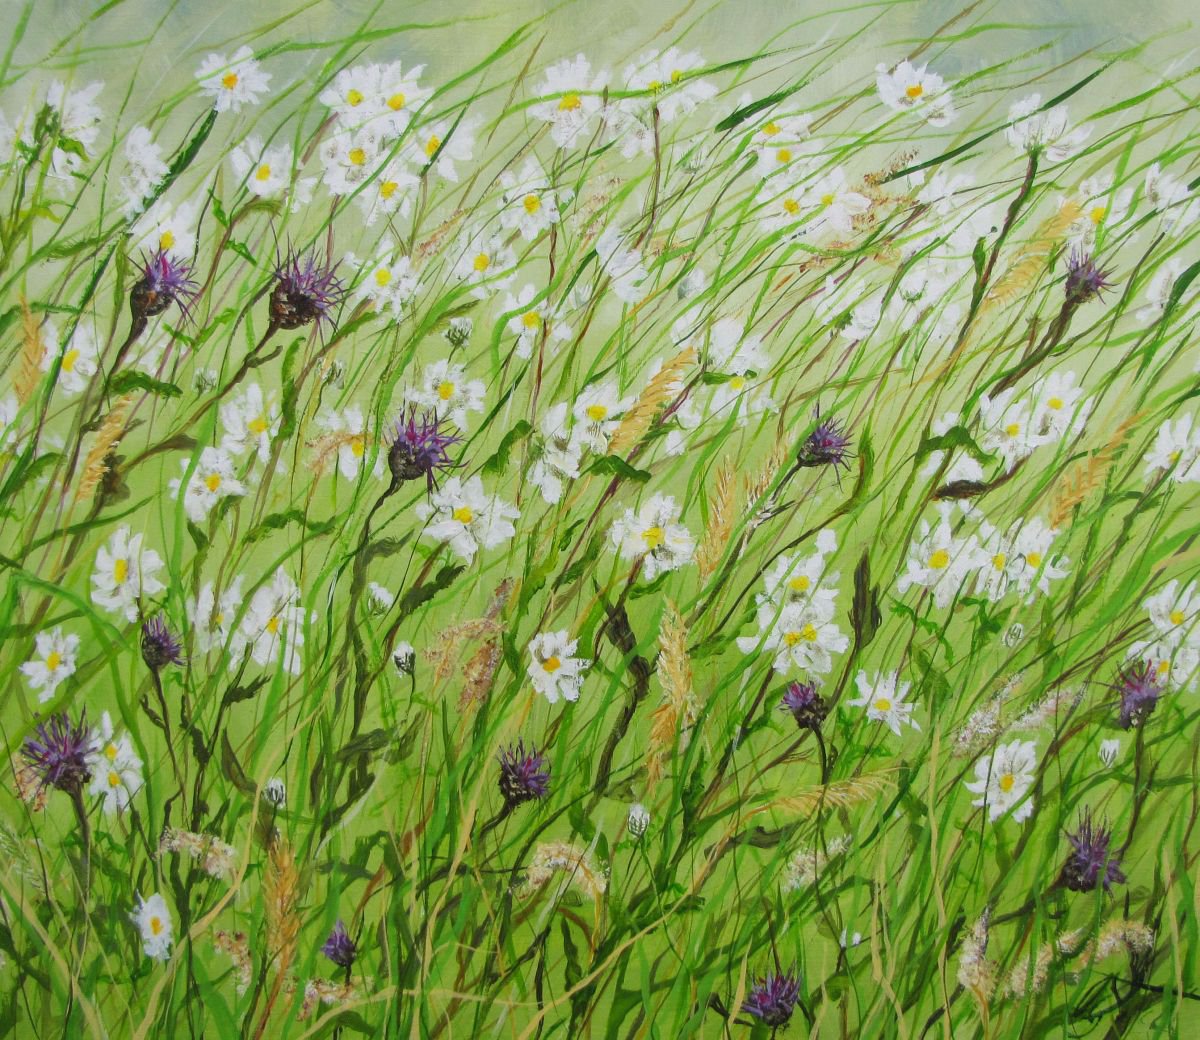 Daisies and Knapweed by Christine Gaut